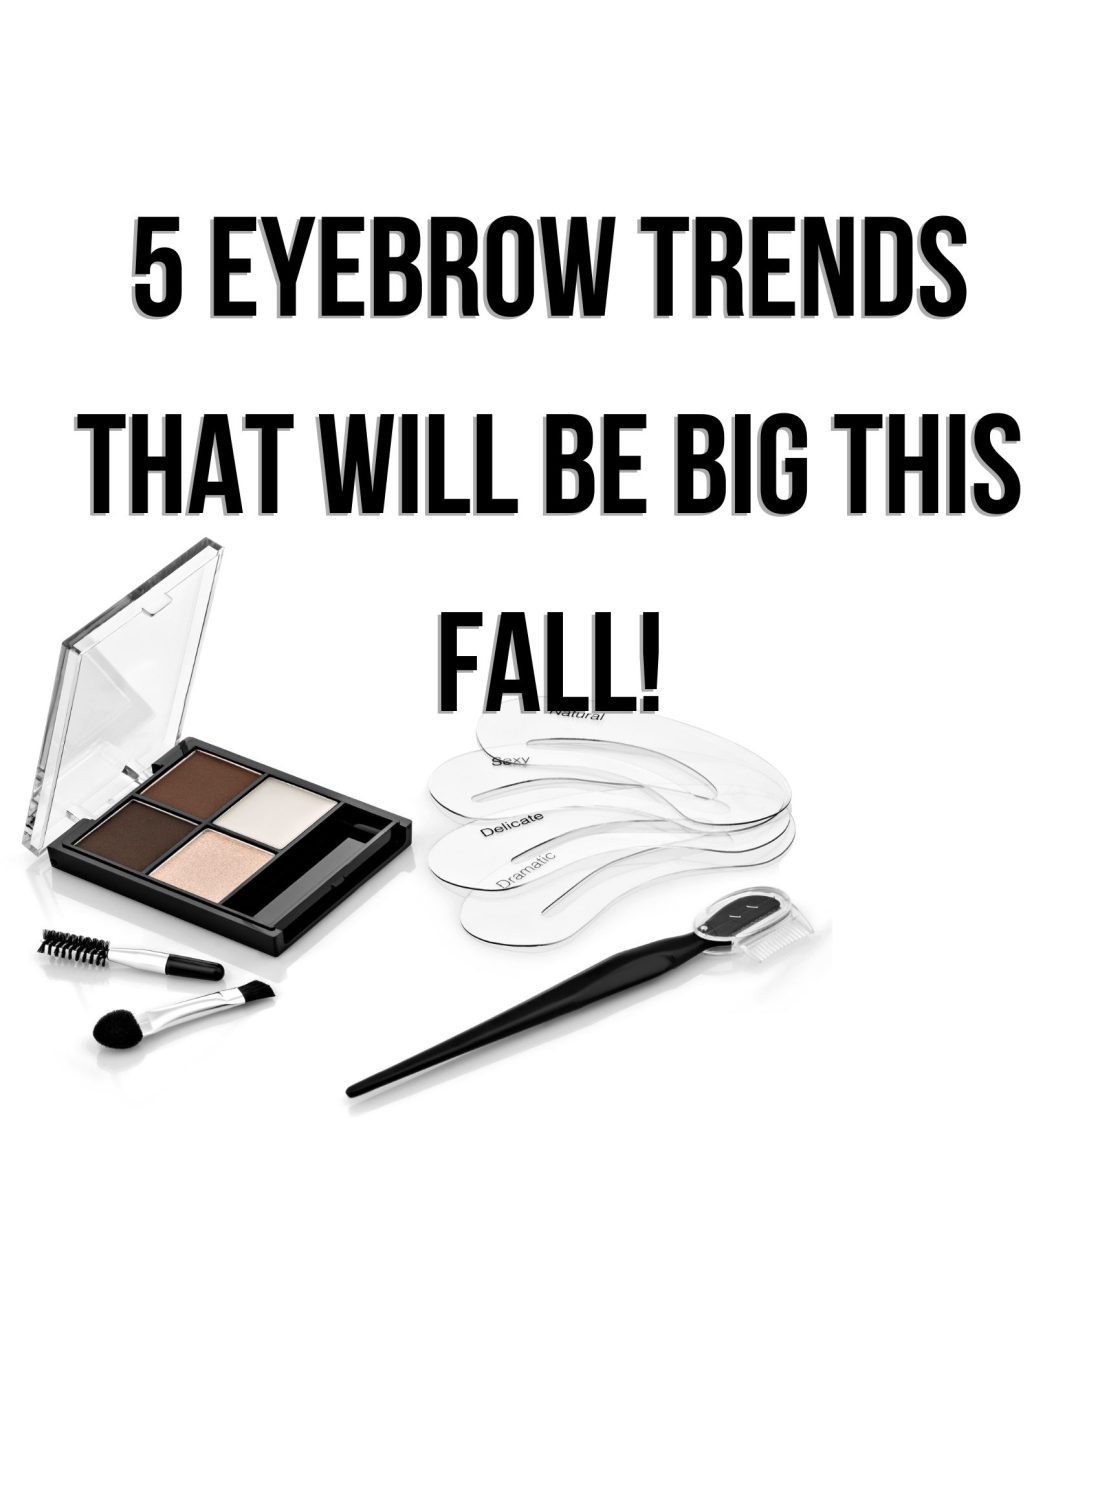 5 Eyebrow Trends That Will Be Big This Fall!